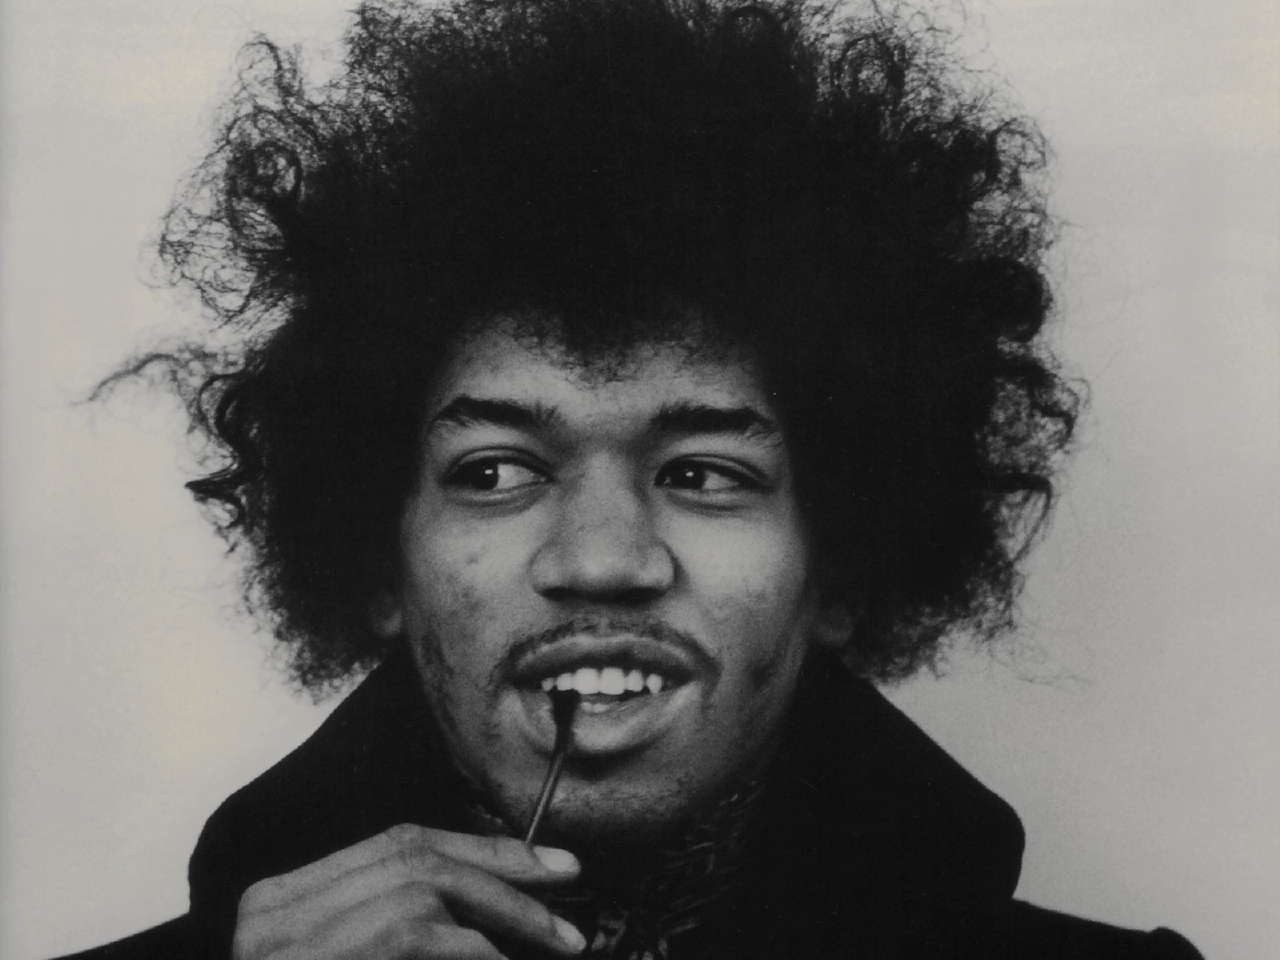 Jimi Hendrix, another legend dead at 27. Also O negative.